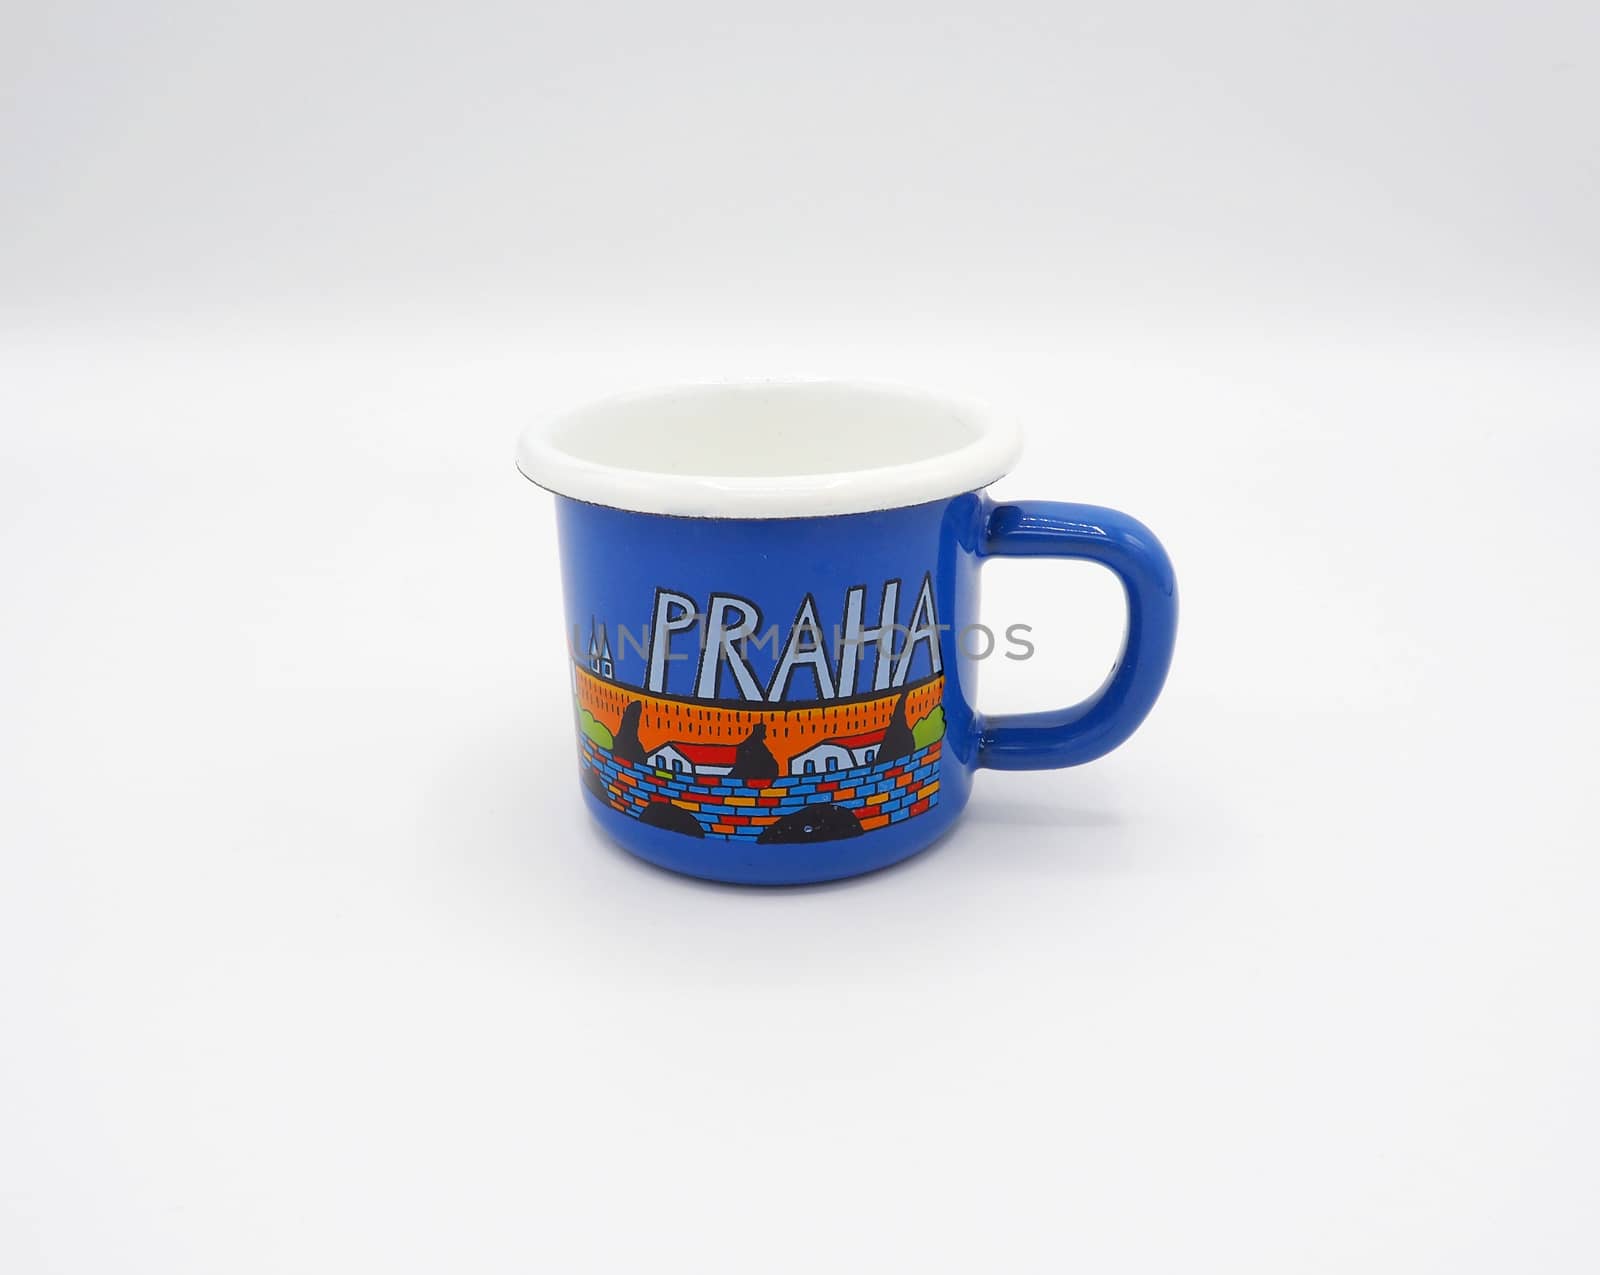 Small tiny and blue colour with hand made art souvenir coffee cup from Praque Czech Replublic and studio shot on white background.